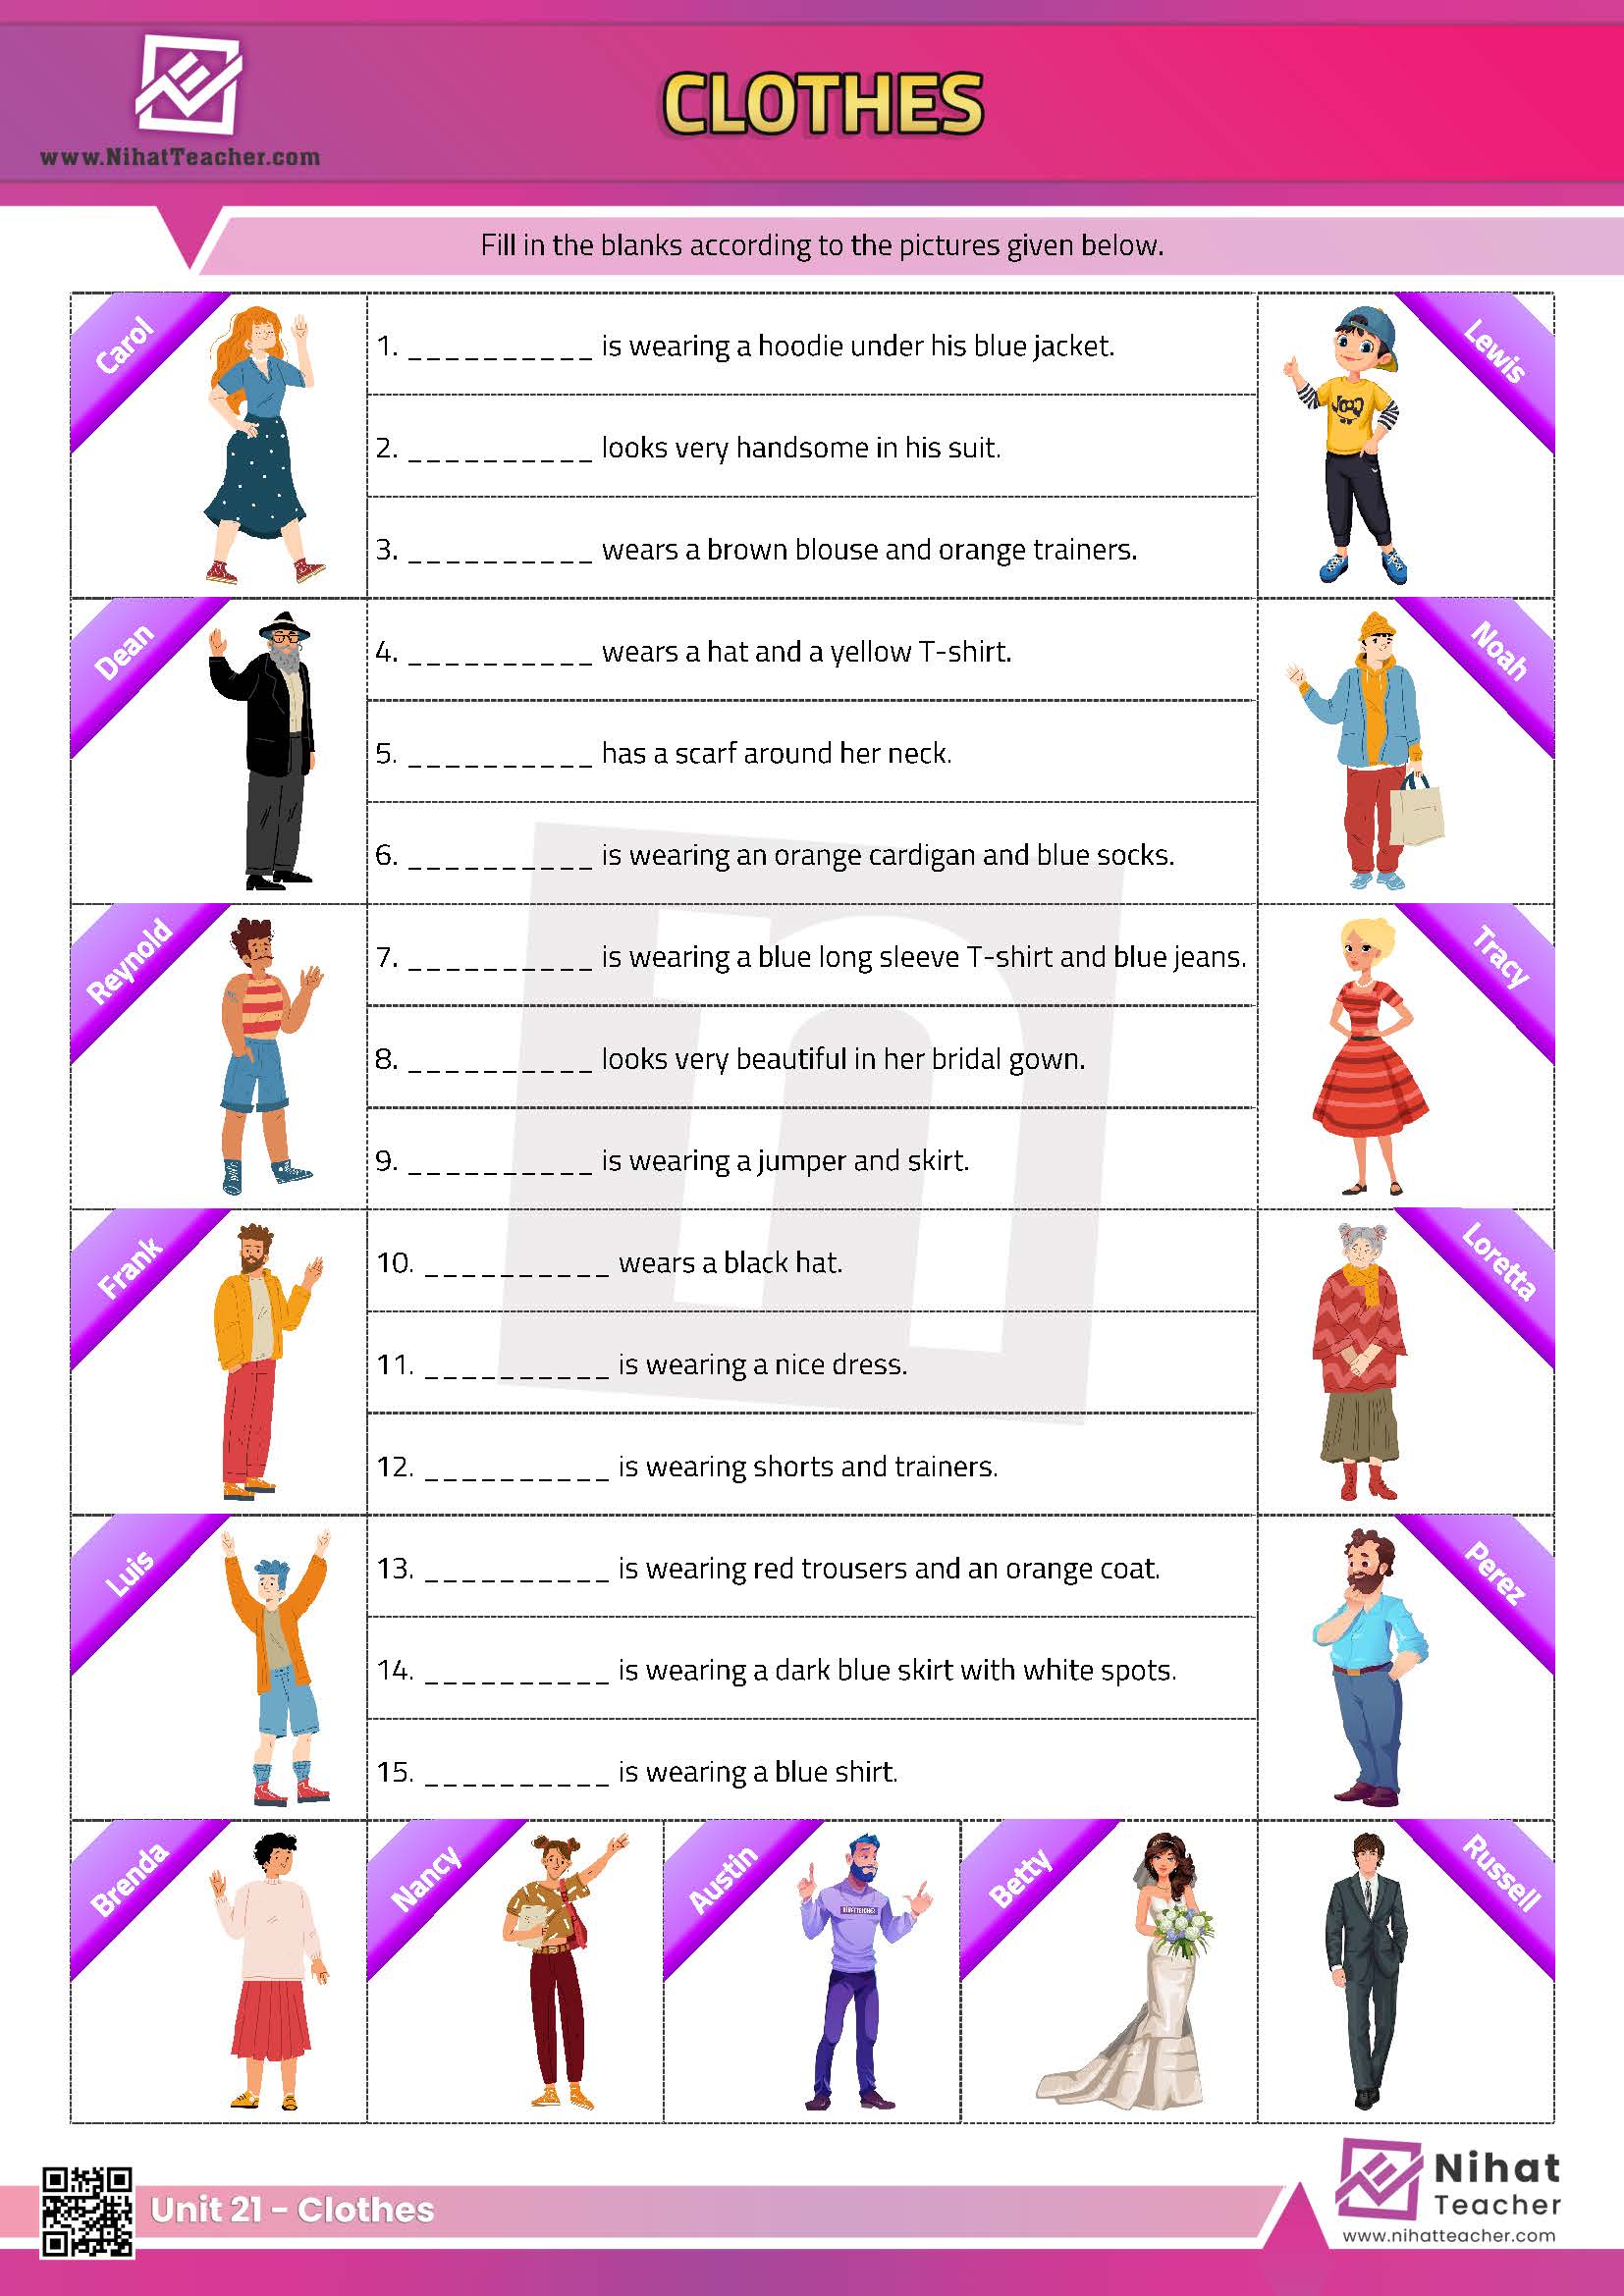 Unit 21 - Clothes Worksheet 3 - Free English learning and teaching  resources - Free PDF worksheets and multiple choice tests.